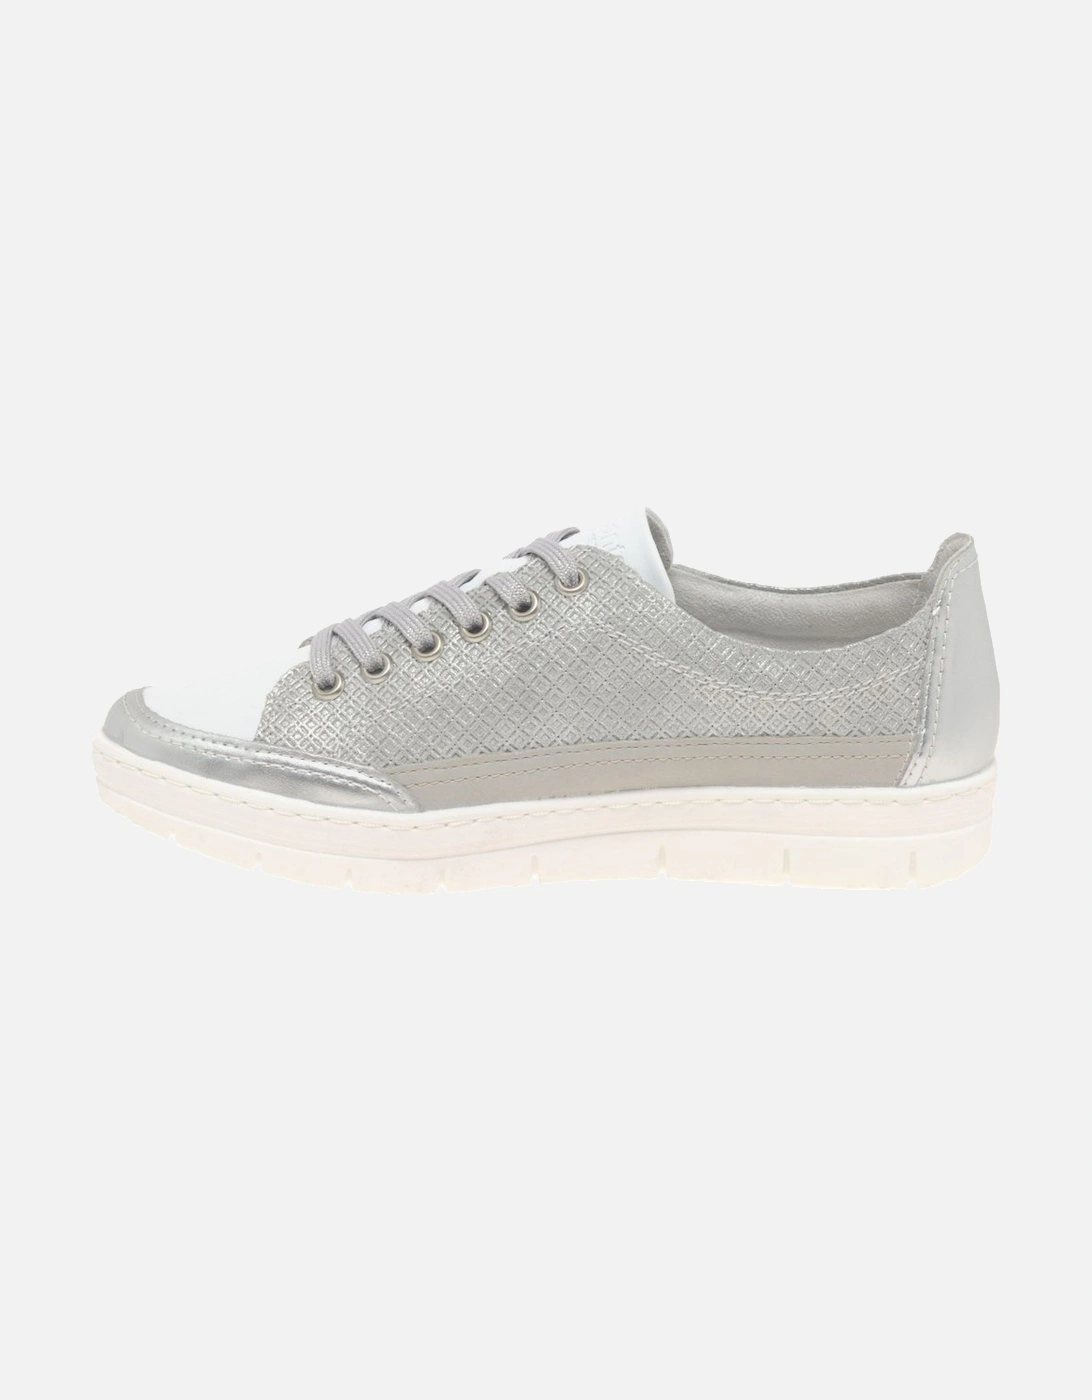 Patty Womens Trainers